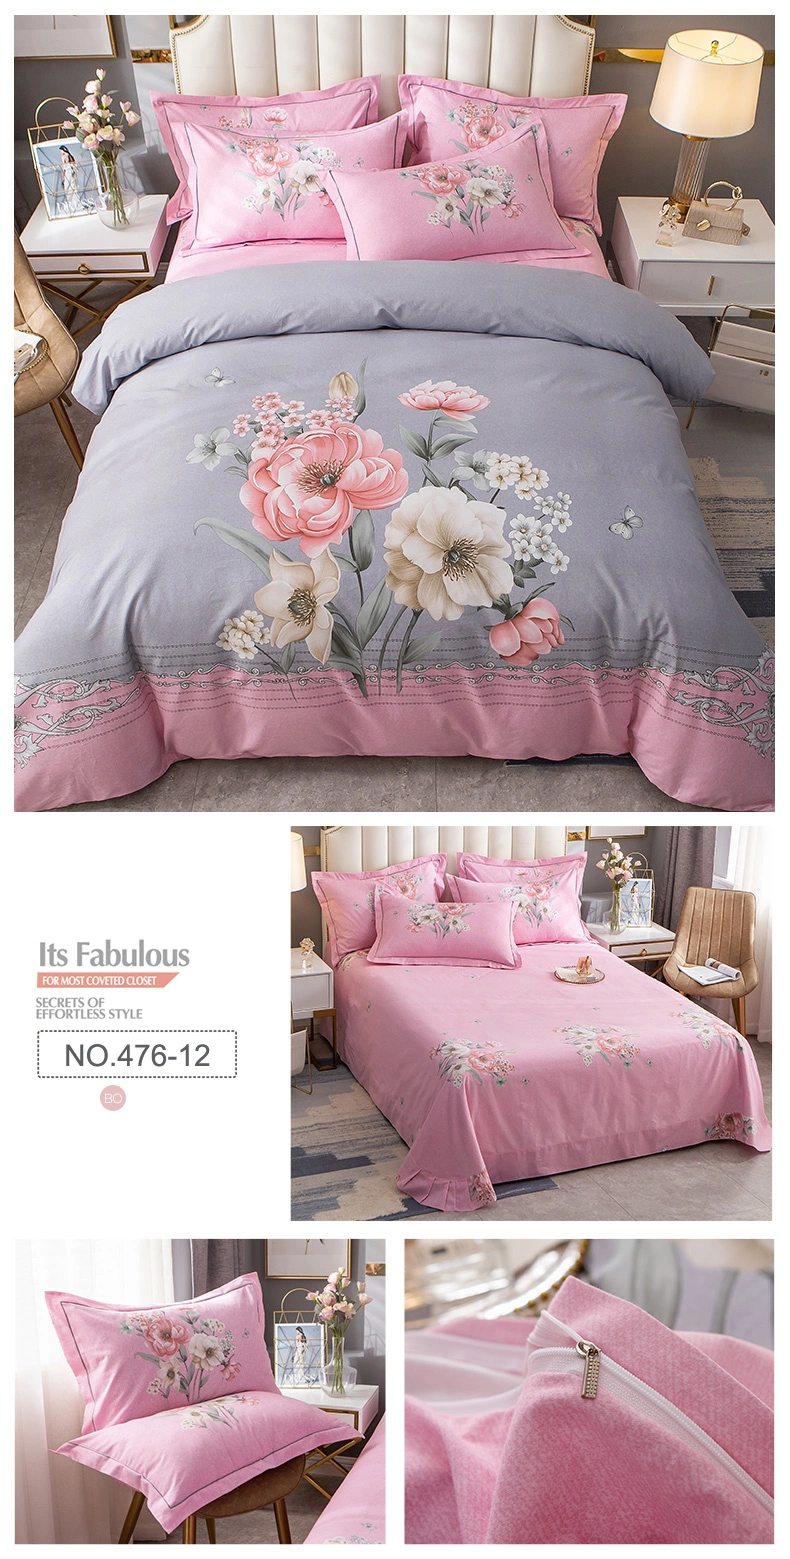 Home Textile High Quality Bed Linen Cotton Brushed Fabric Comfortable for Single Bed Duvet Cover